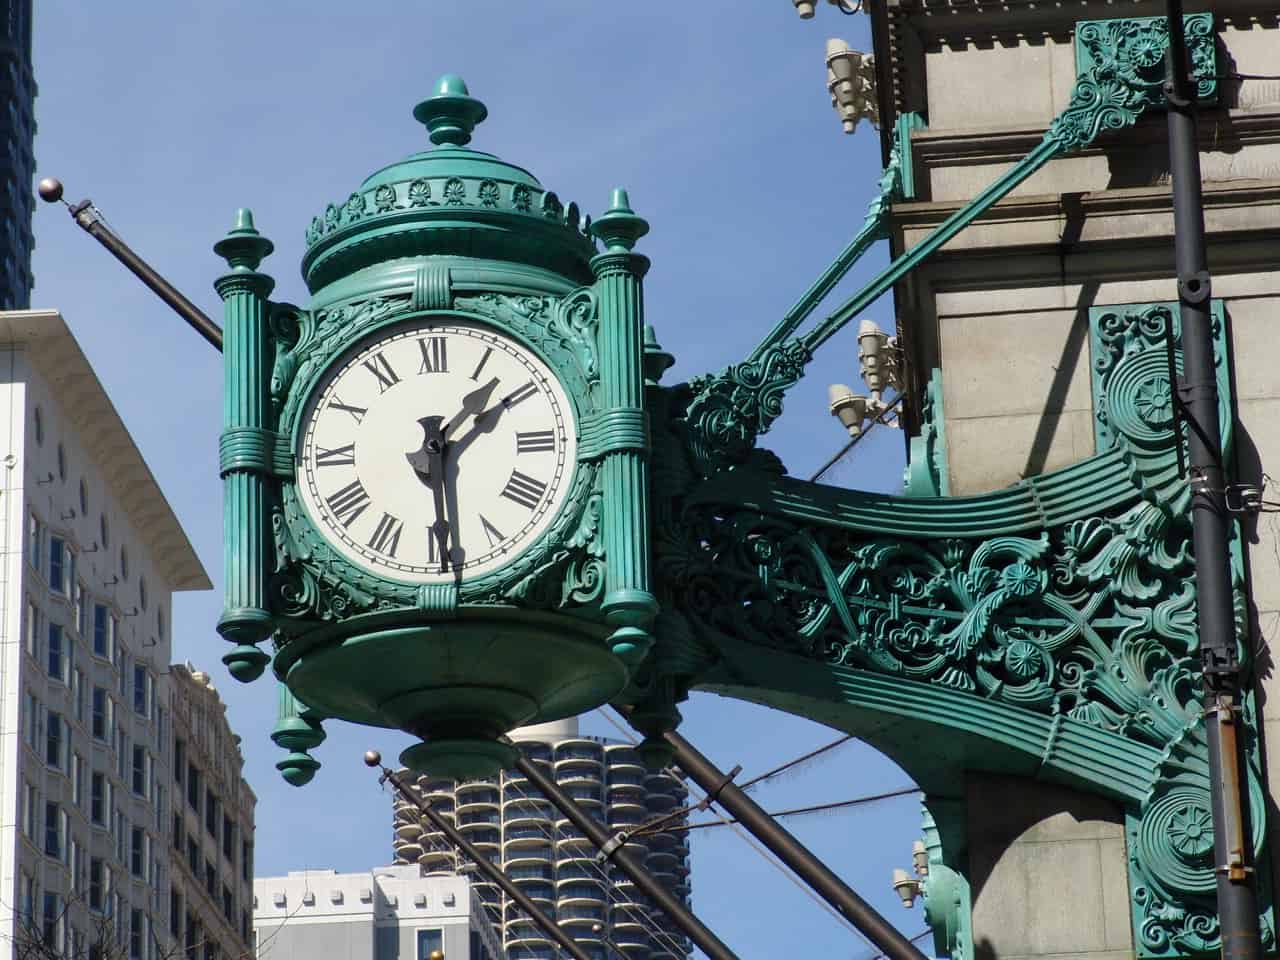 The Great Clock of Marshall Field & Company in Chicago